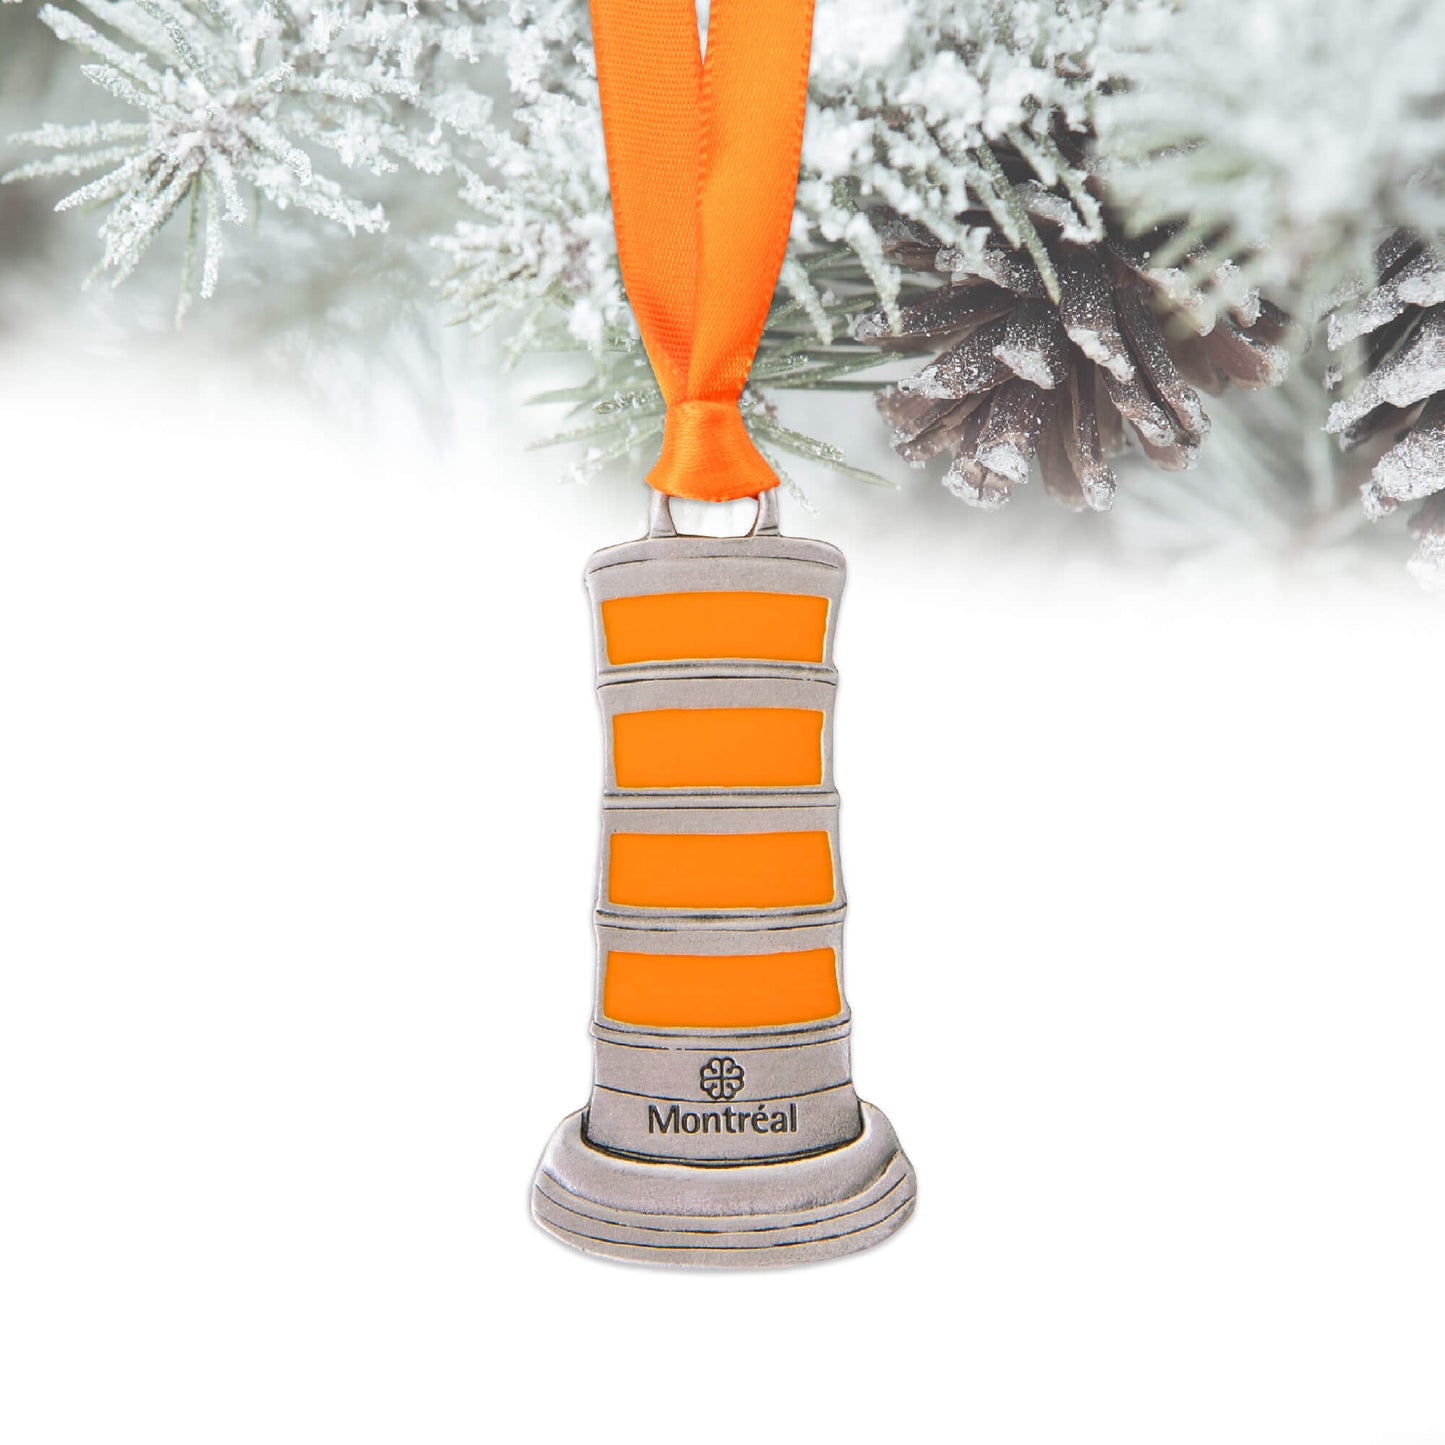 orange traffic cone, montreal, pewter ornament, holiday decoration, orange ribbon, gift, collectible, tree decoration, funny gift